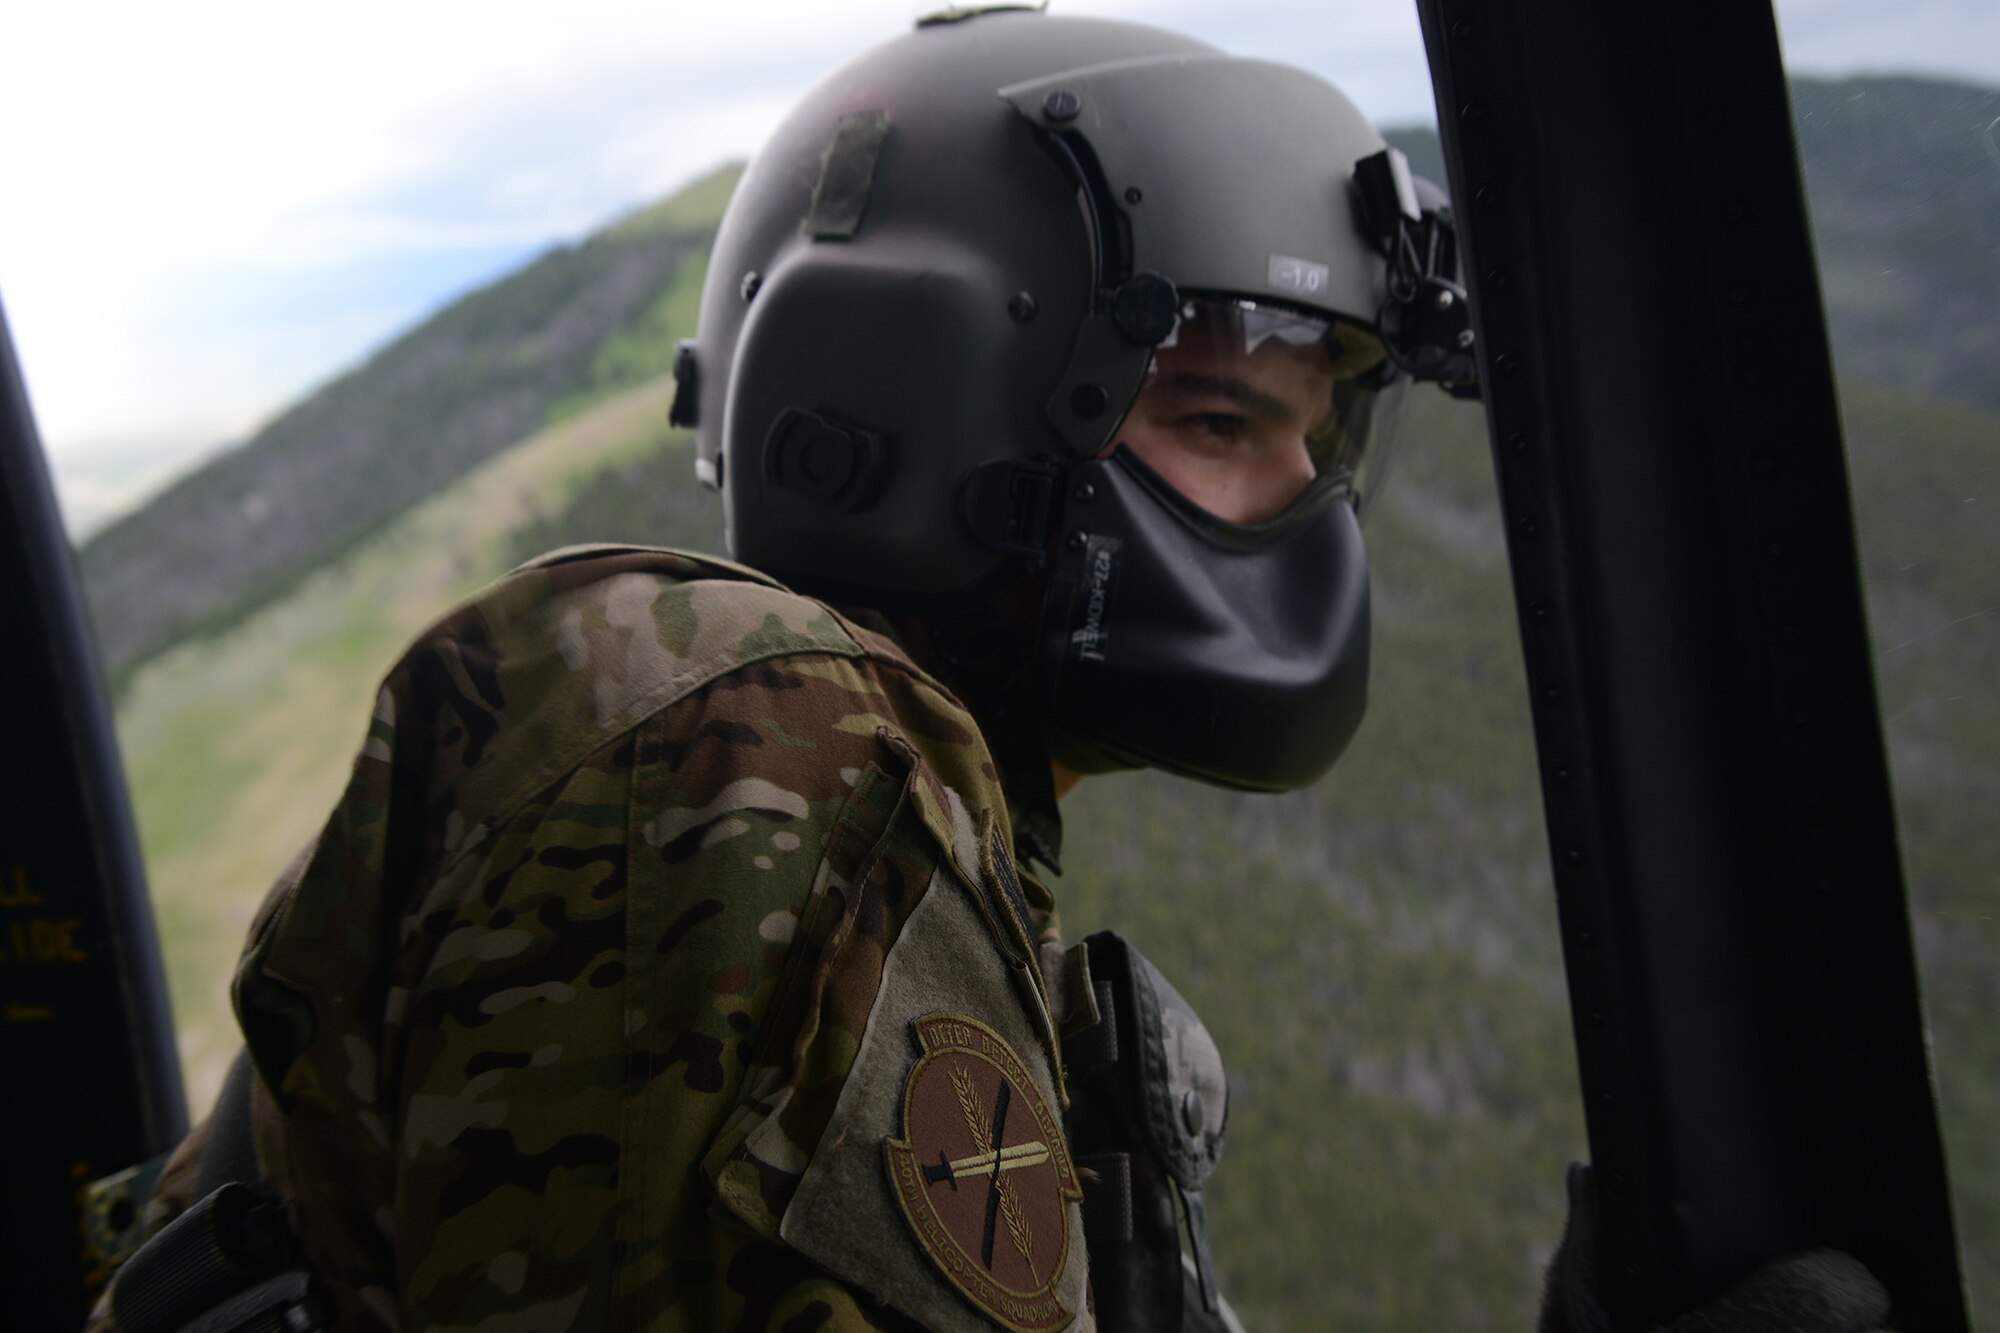 Tech. Sgt. Travis Kidwell, 40th Helicopter Squadron UH-1N Iriquois flight engineer, calls approach to the pilots as they descend into the landing zone July 6, 2016, near Malmstrom Air Force Base, Mont. Flight engineers guide the pilots using a countdown while looking outside to ensure the main and tail rotors are clear of any obstacles. (U.S. Air Force photo/Staff Sgt. Delia Marchick)